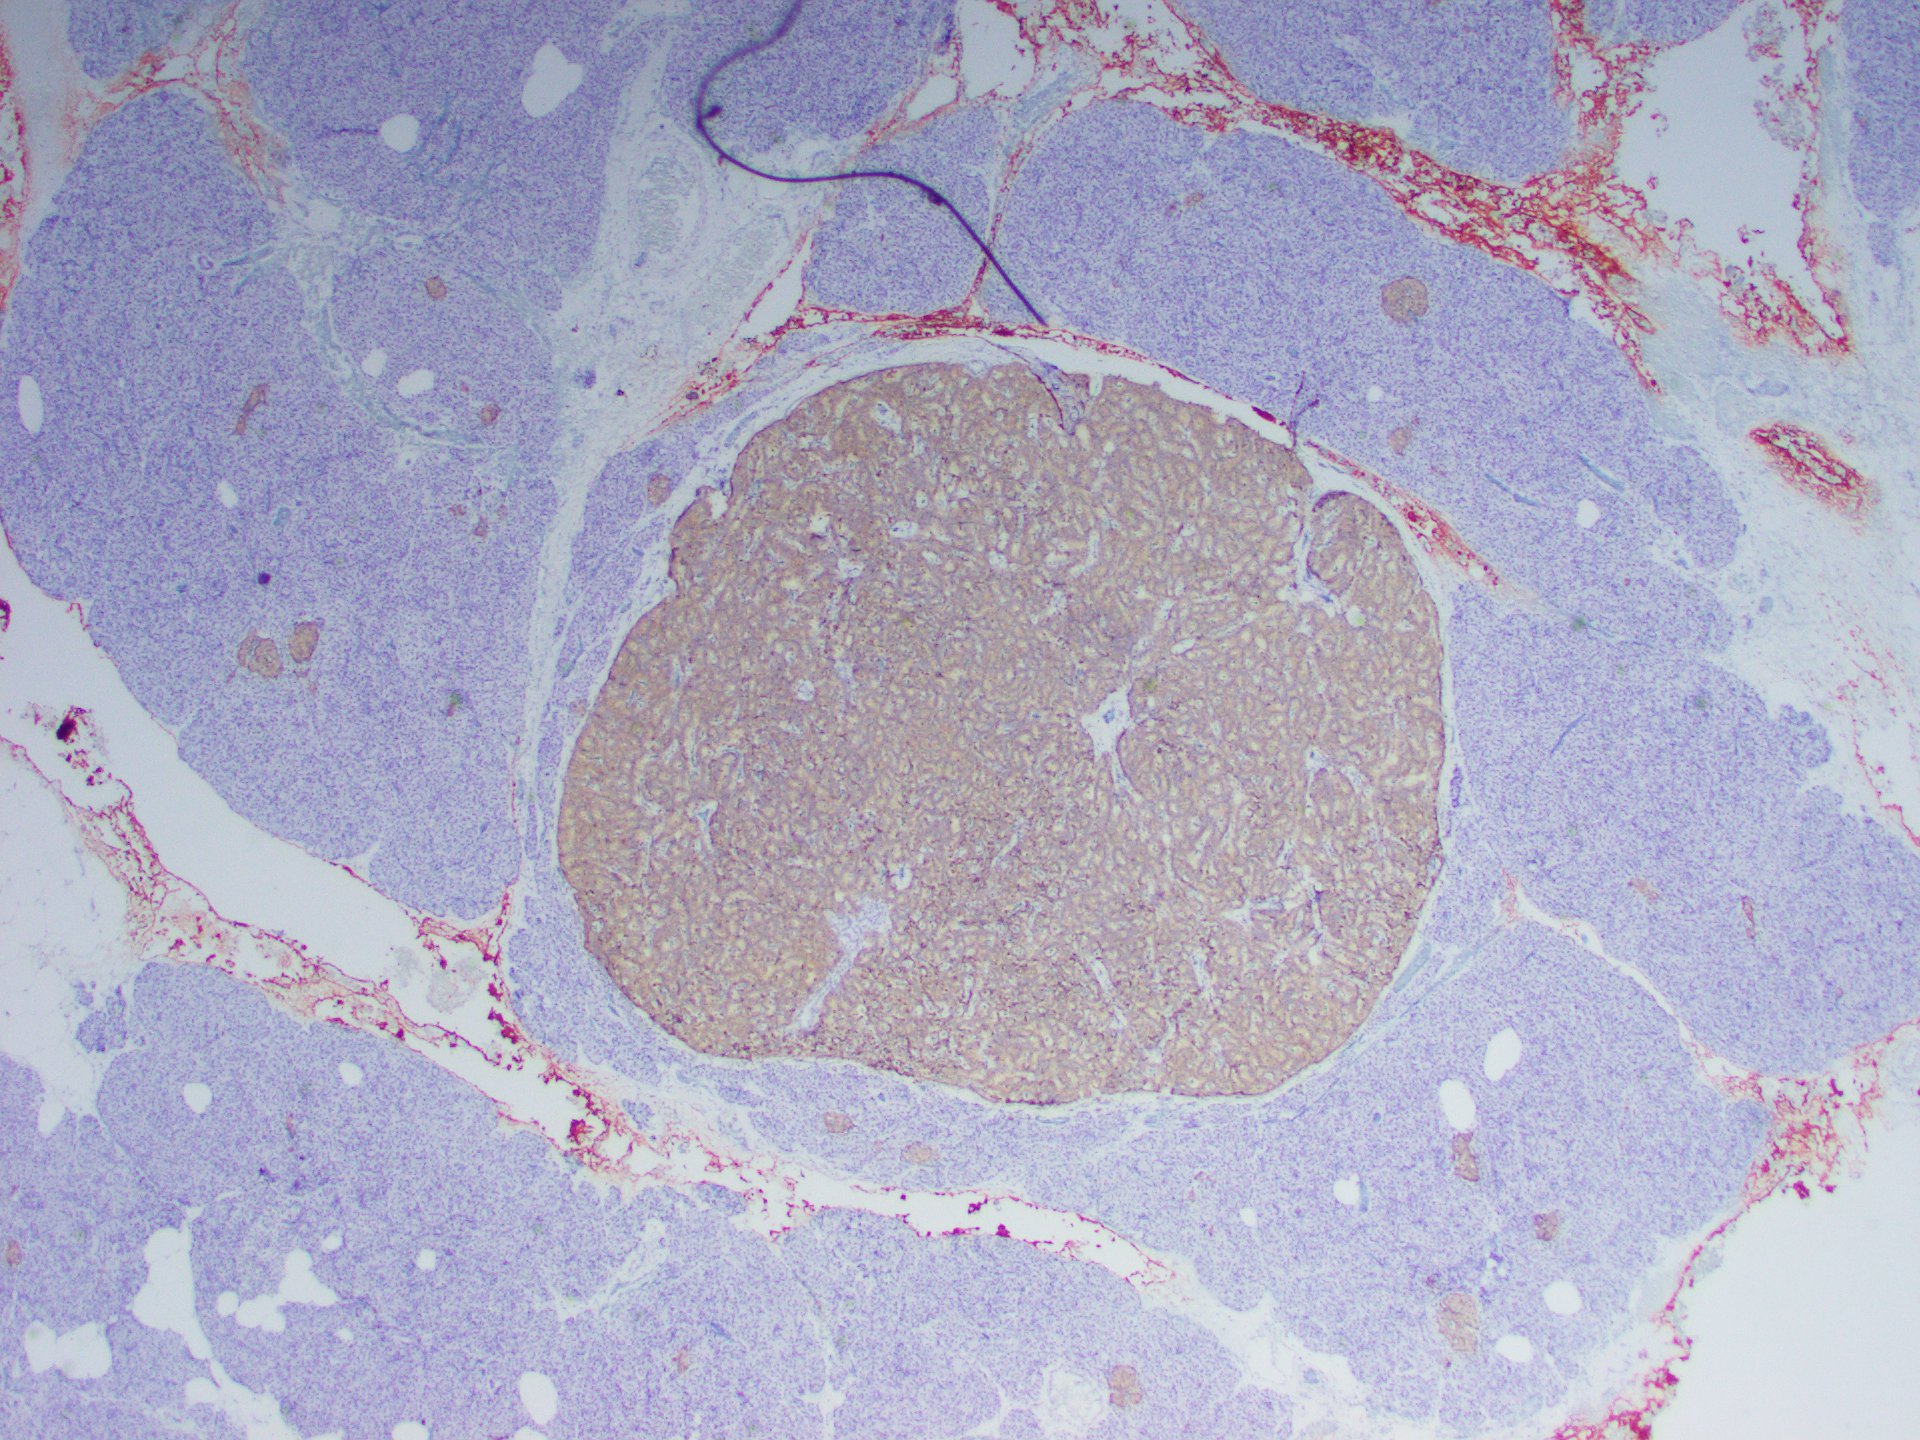 Figure 9: The patient’s microadenoma was also positive for synaptophysin. x20.